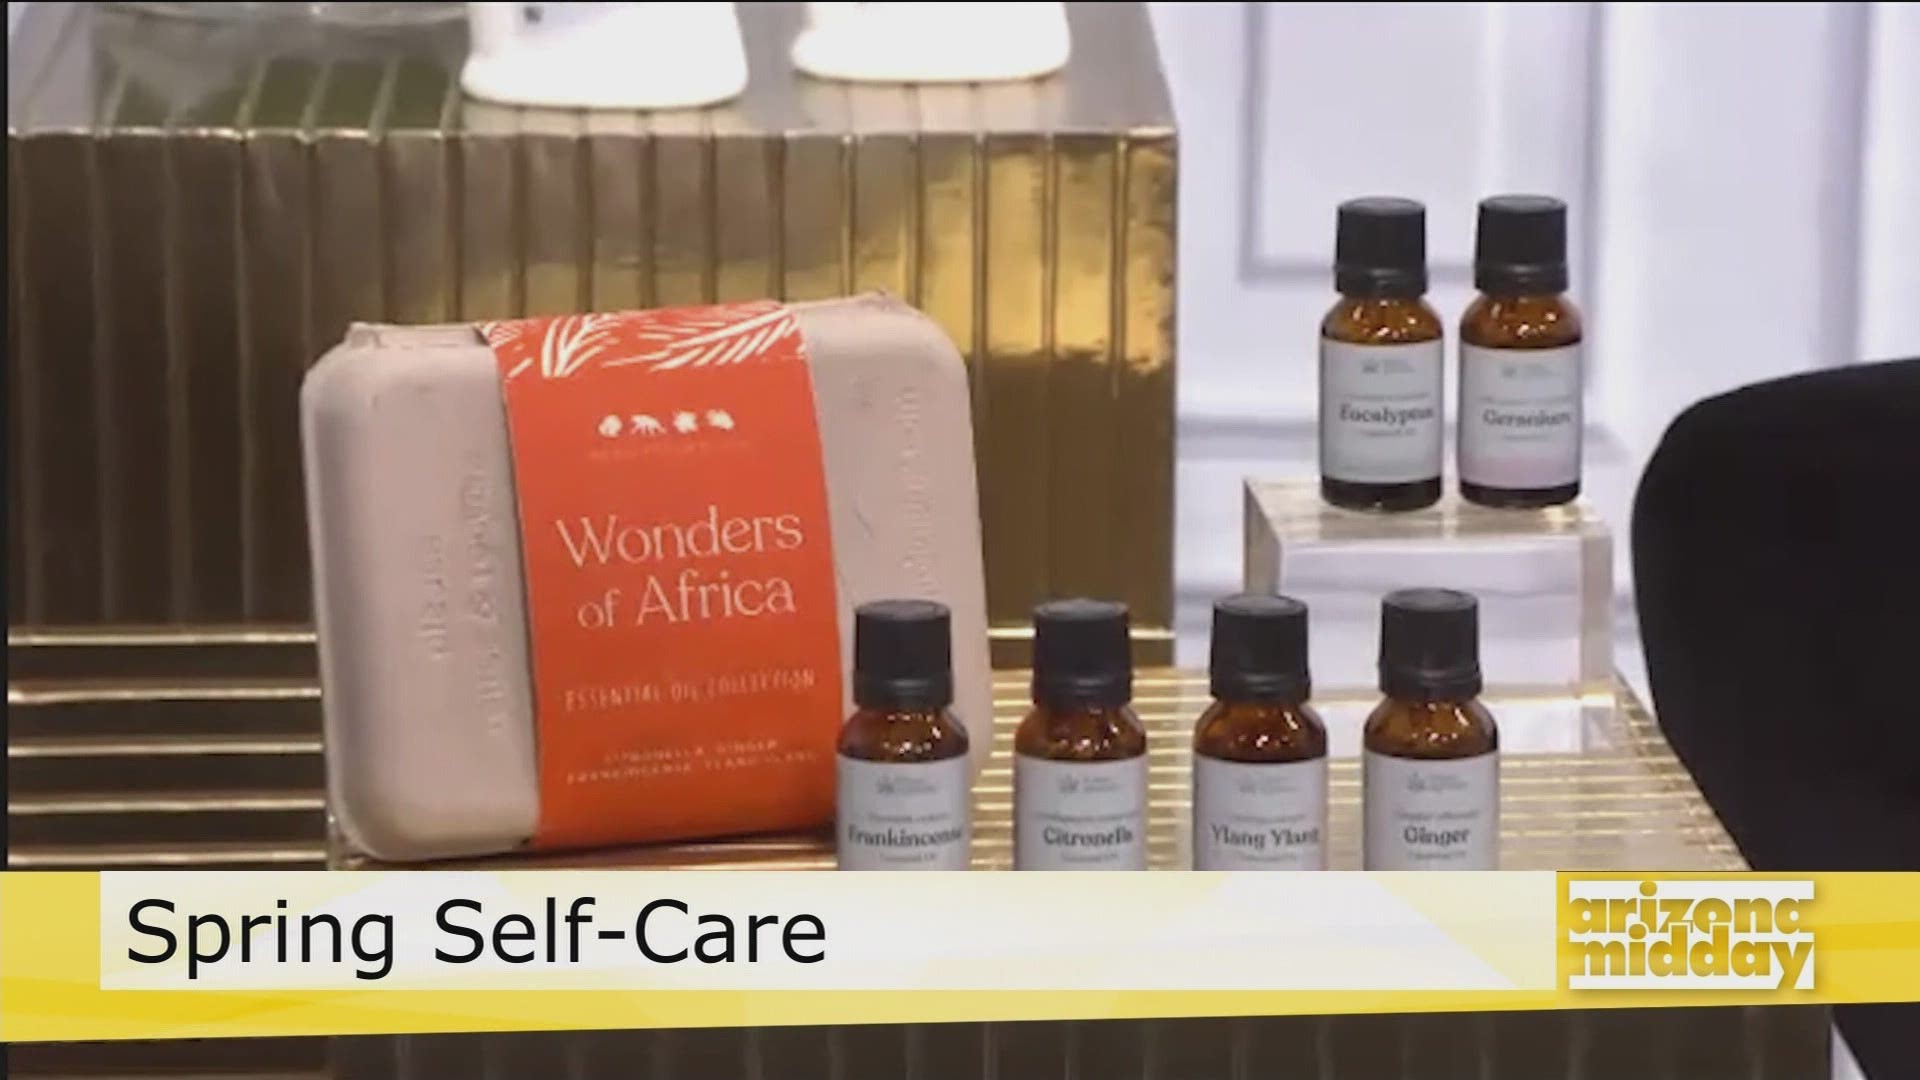 Lifestyle Expert, Joann Butler, shares her top spring self care tips from Curel, Colab & Forest Remedies